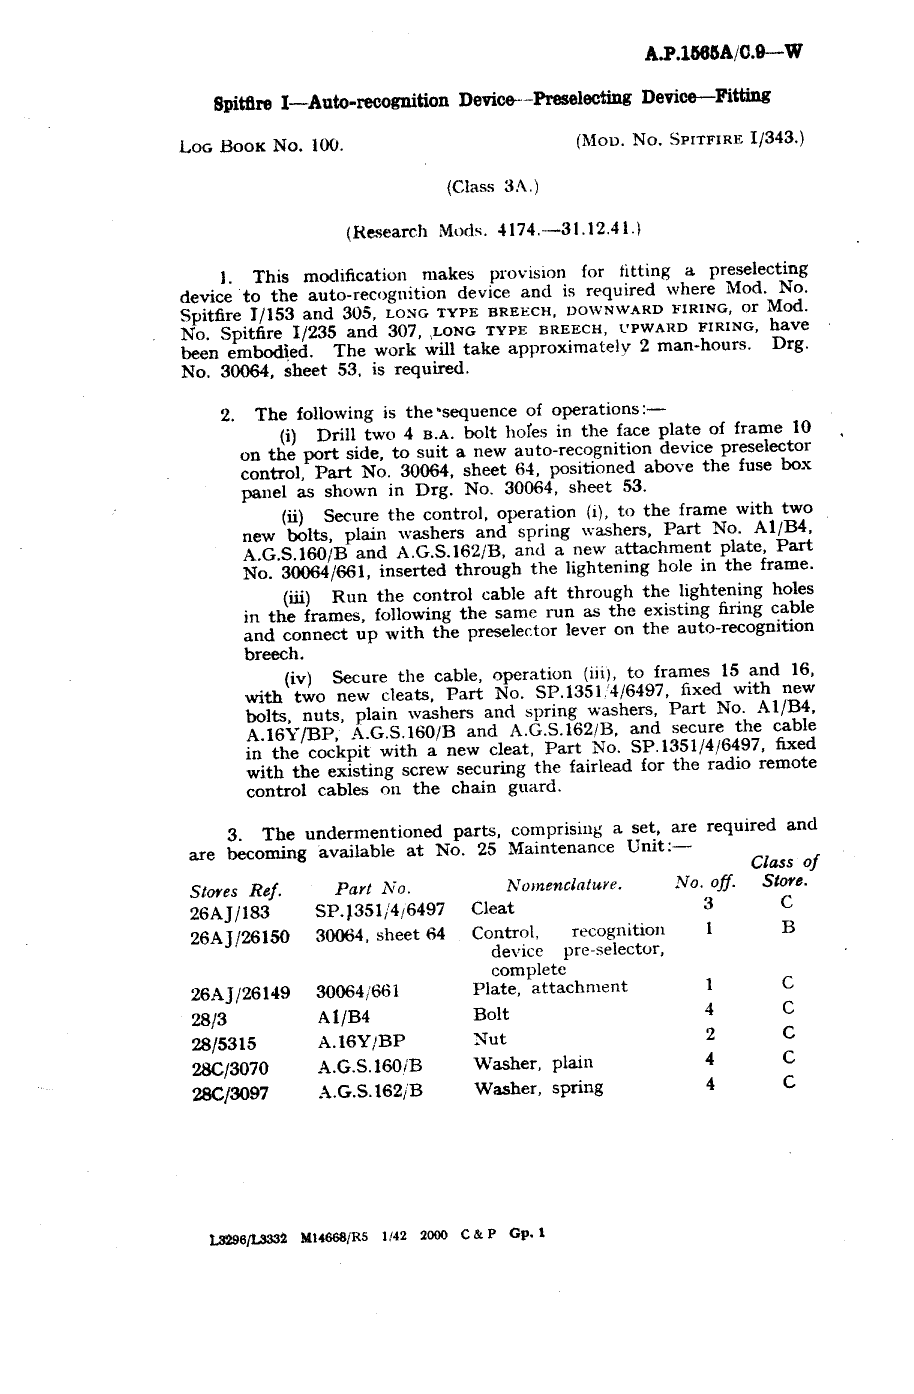 Sample page 1 from AirCorps Library document: Spitfire I Auto-Recognition Device Preselecting Device Fitting